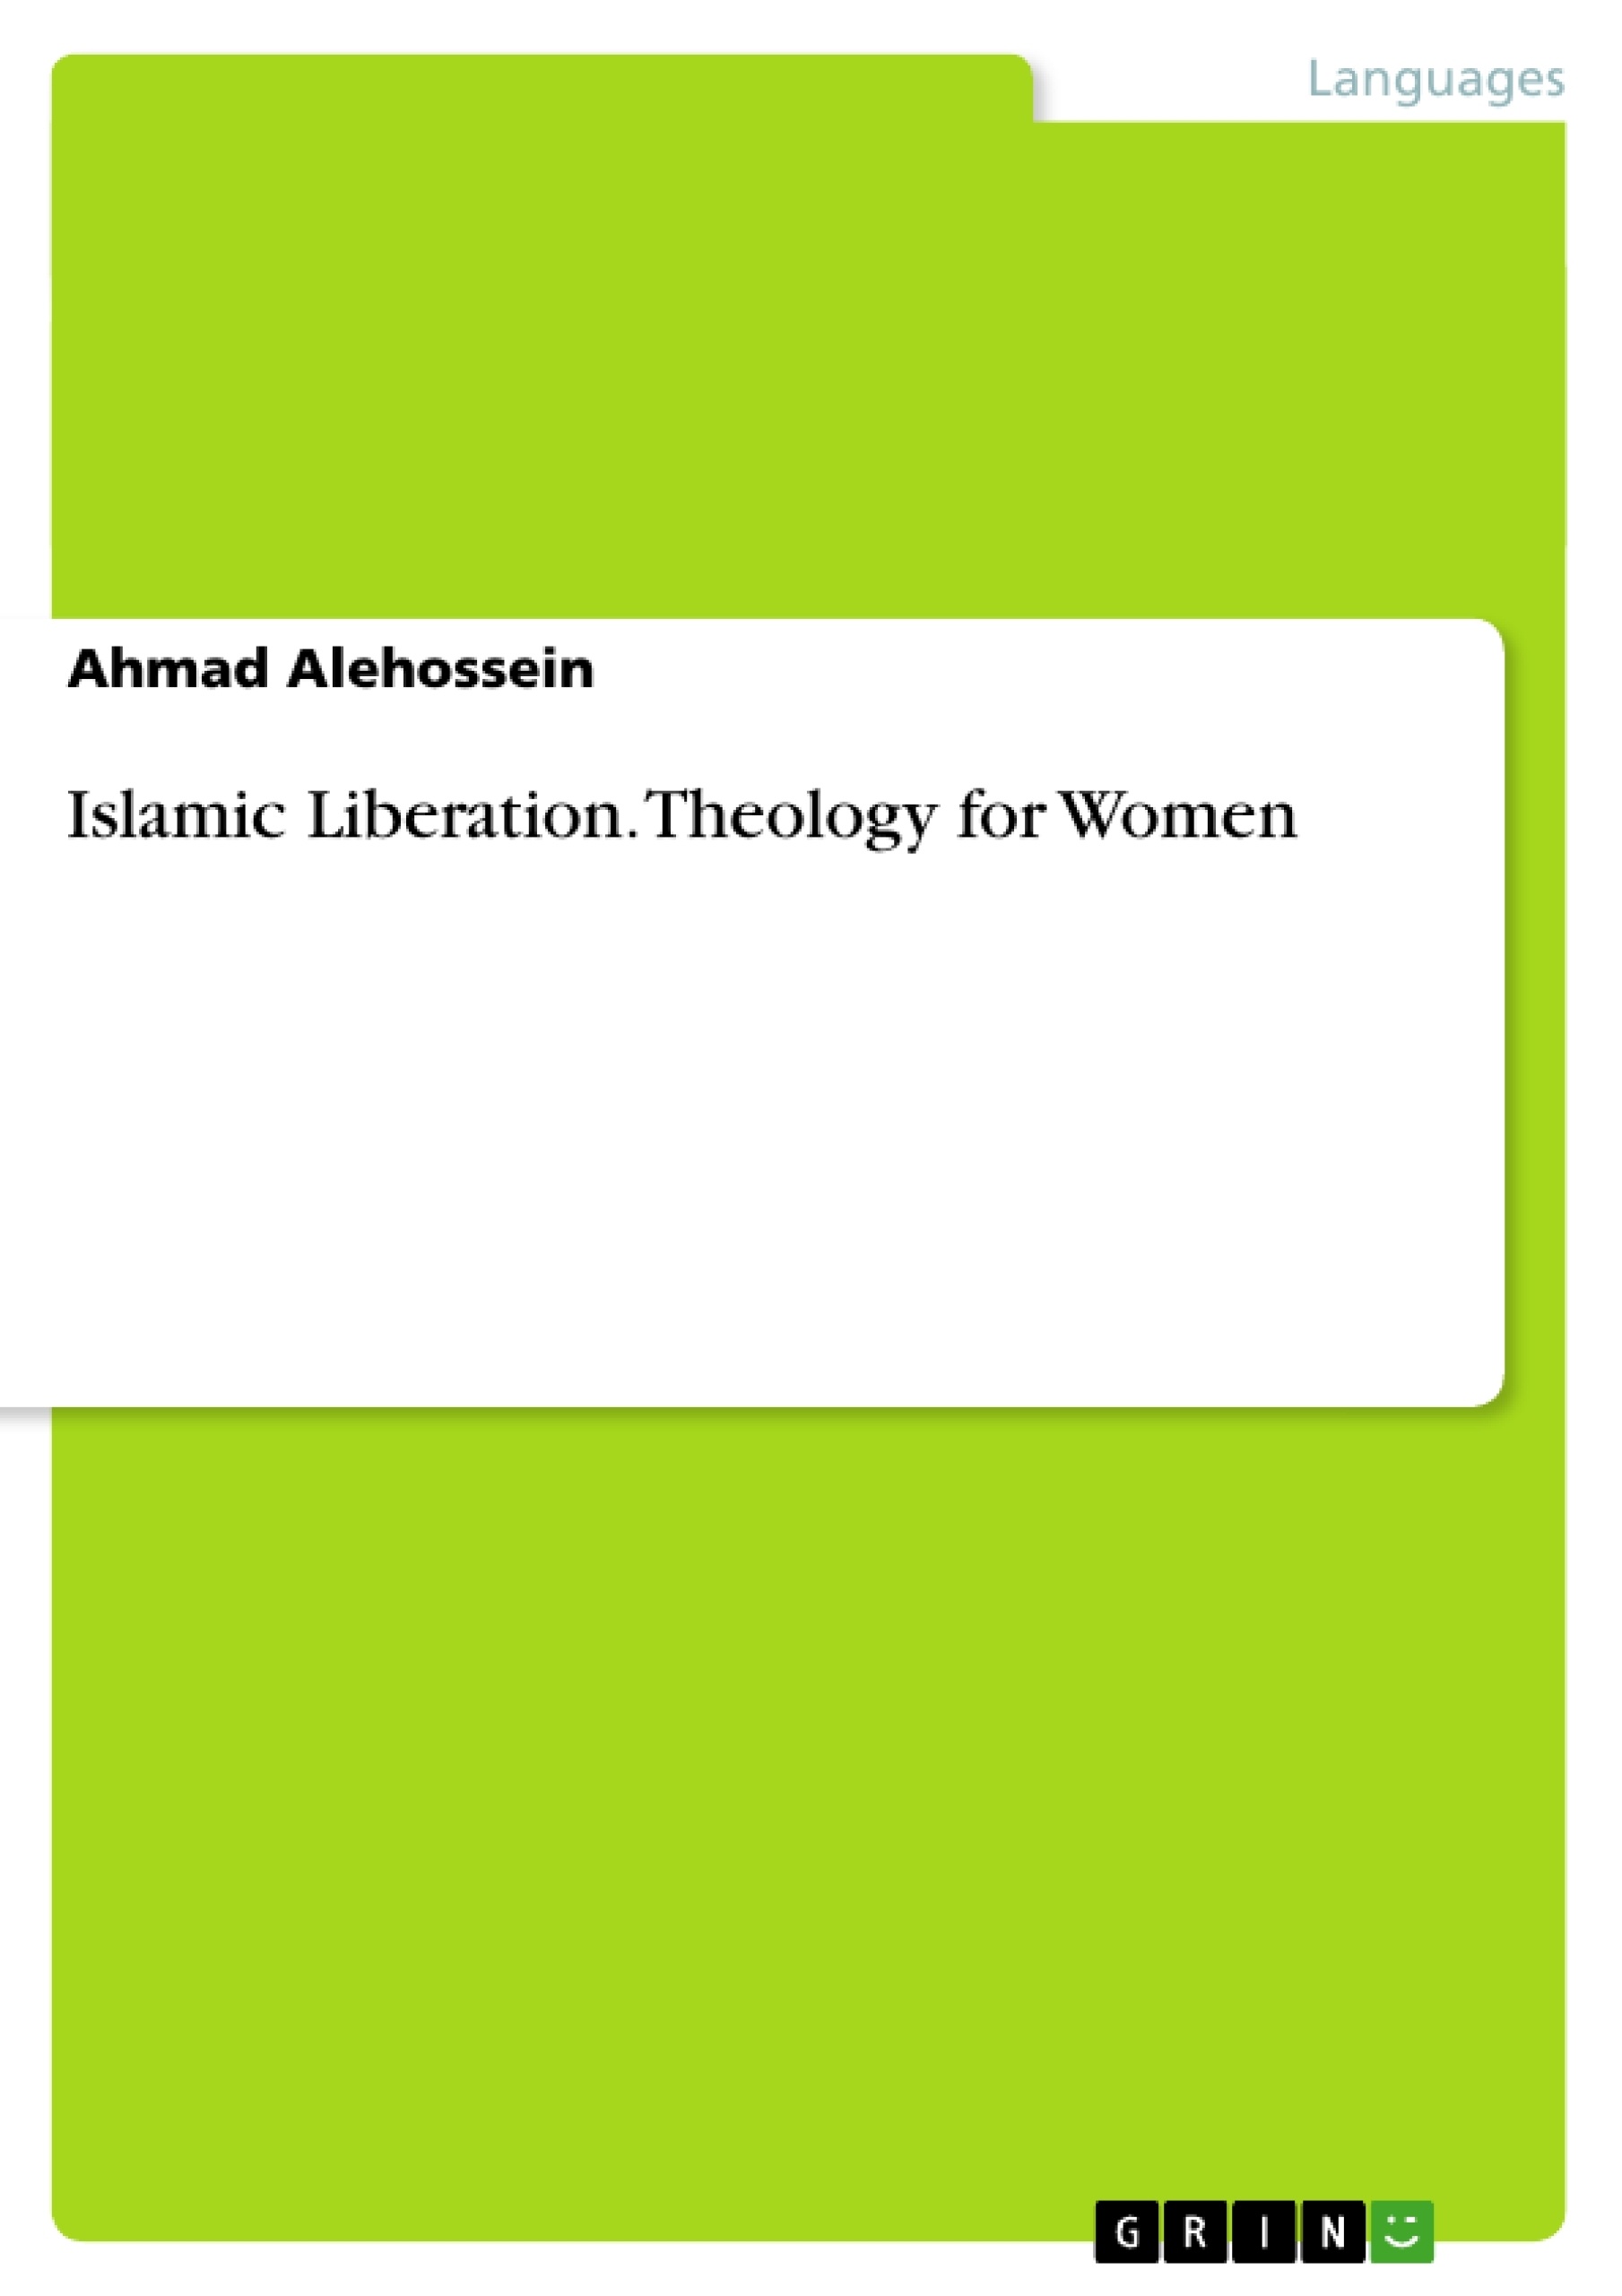 Título: Islamic Liberation. Theology for Women